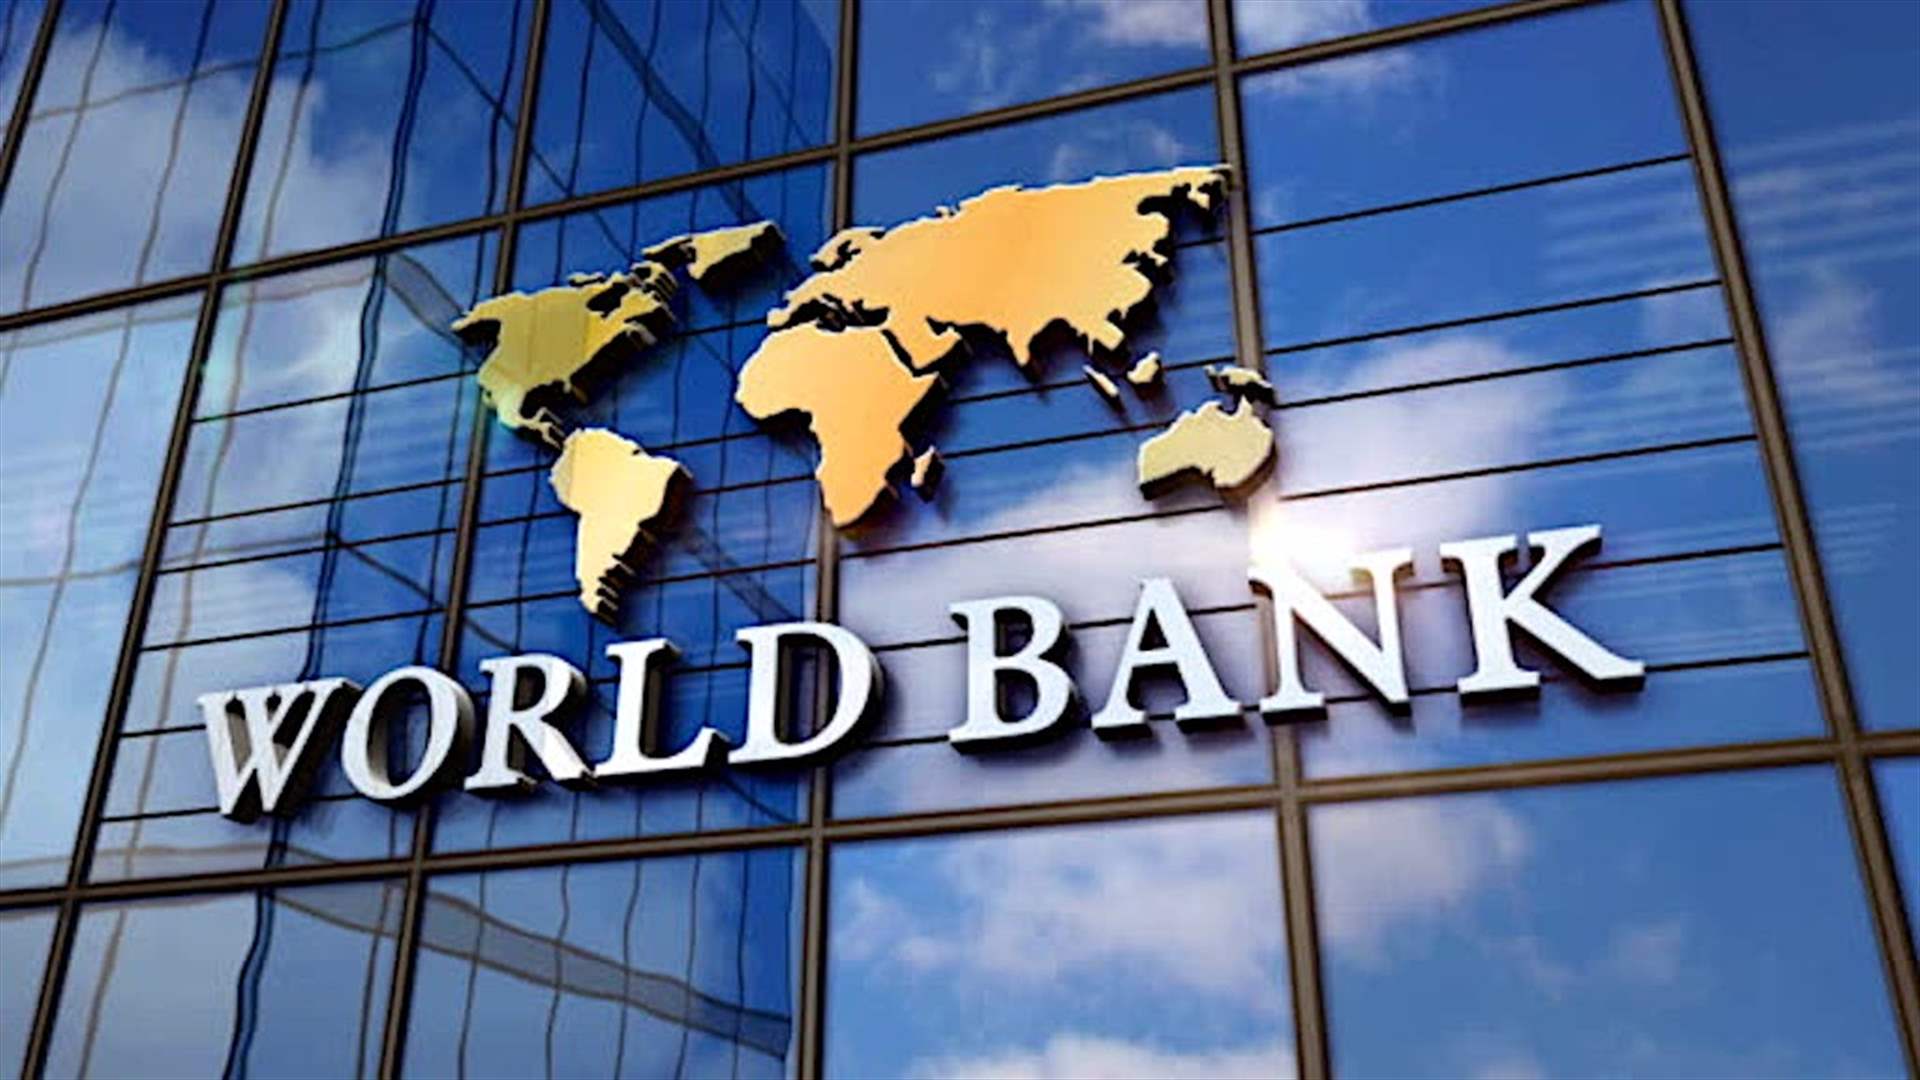 World Bank announces suspension of funding for all its operations in Niger